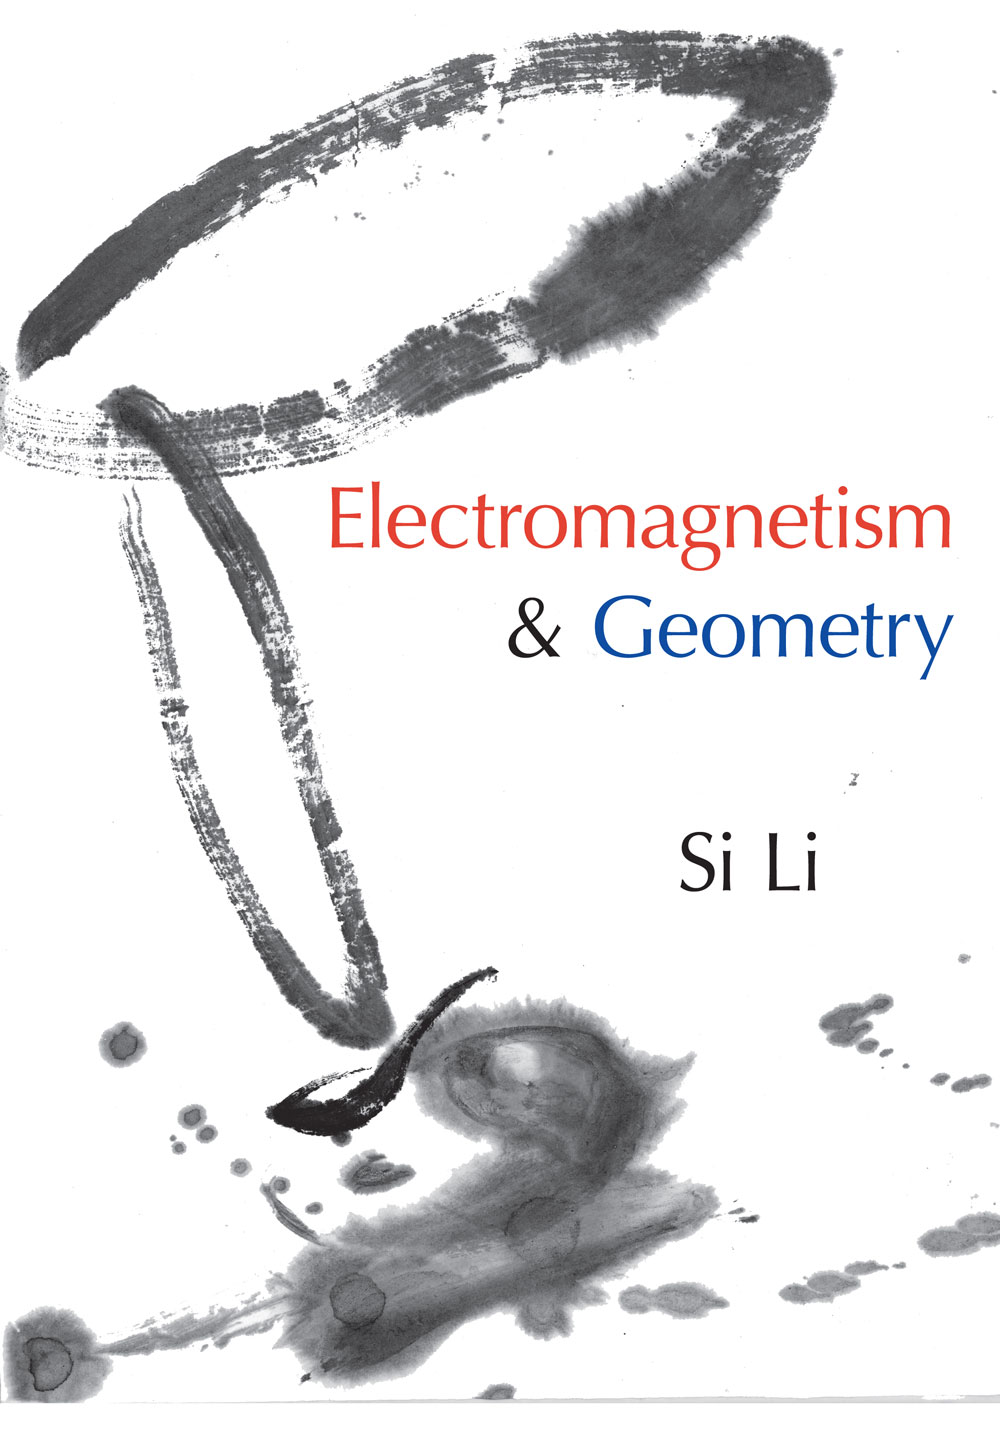 Electromagnetism and Geometry